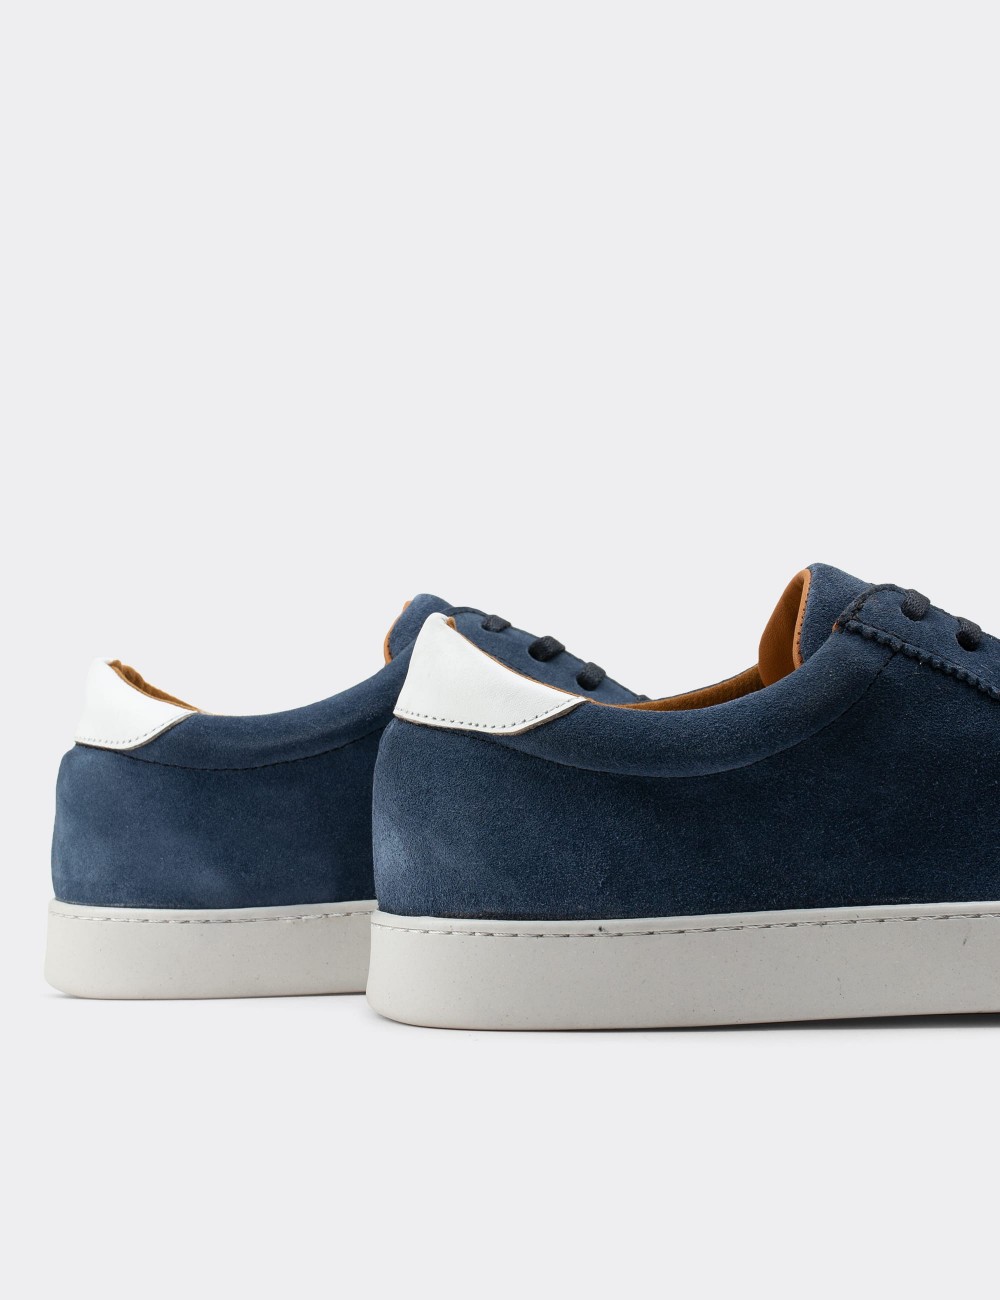 Blue Suede Leather Sneakers - 01885MMVIC01